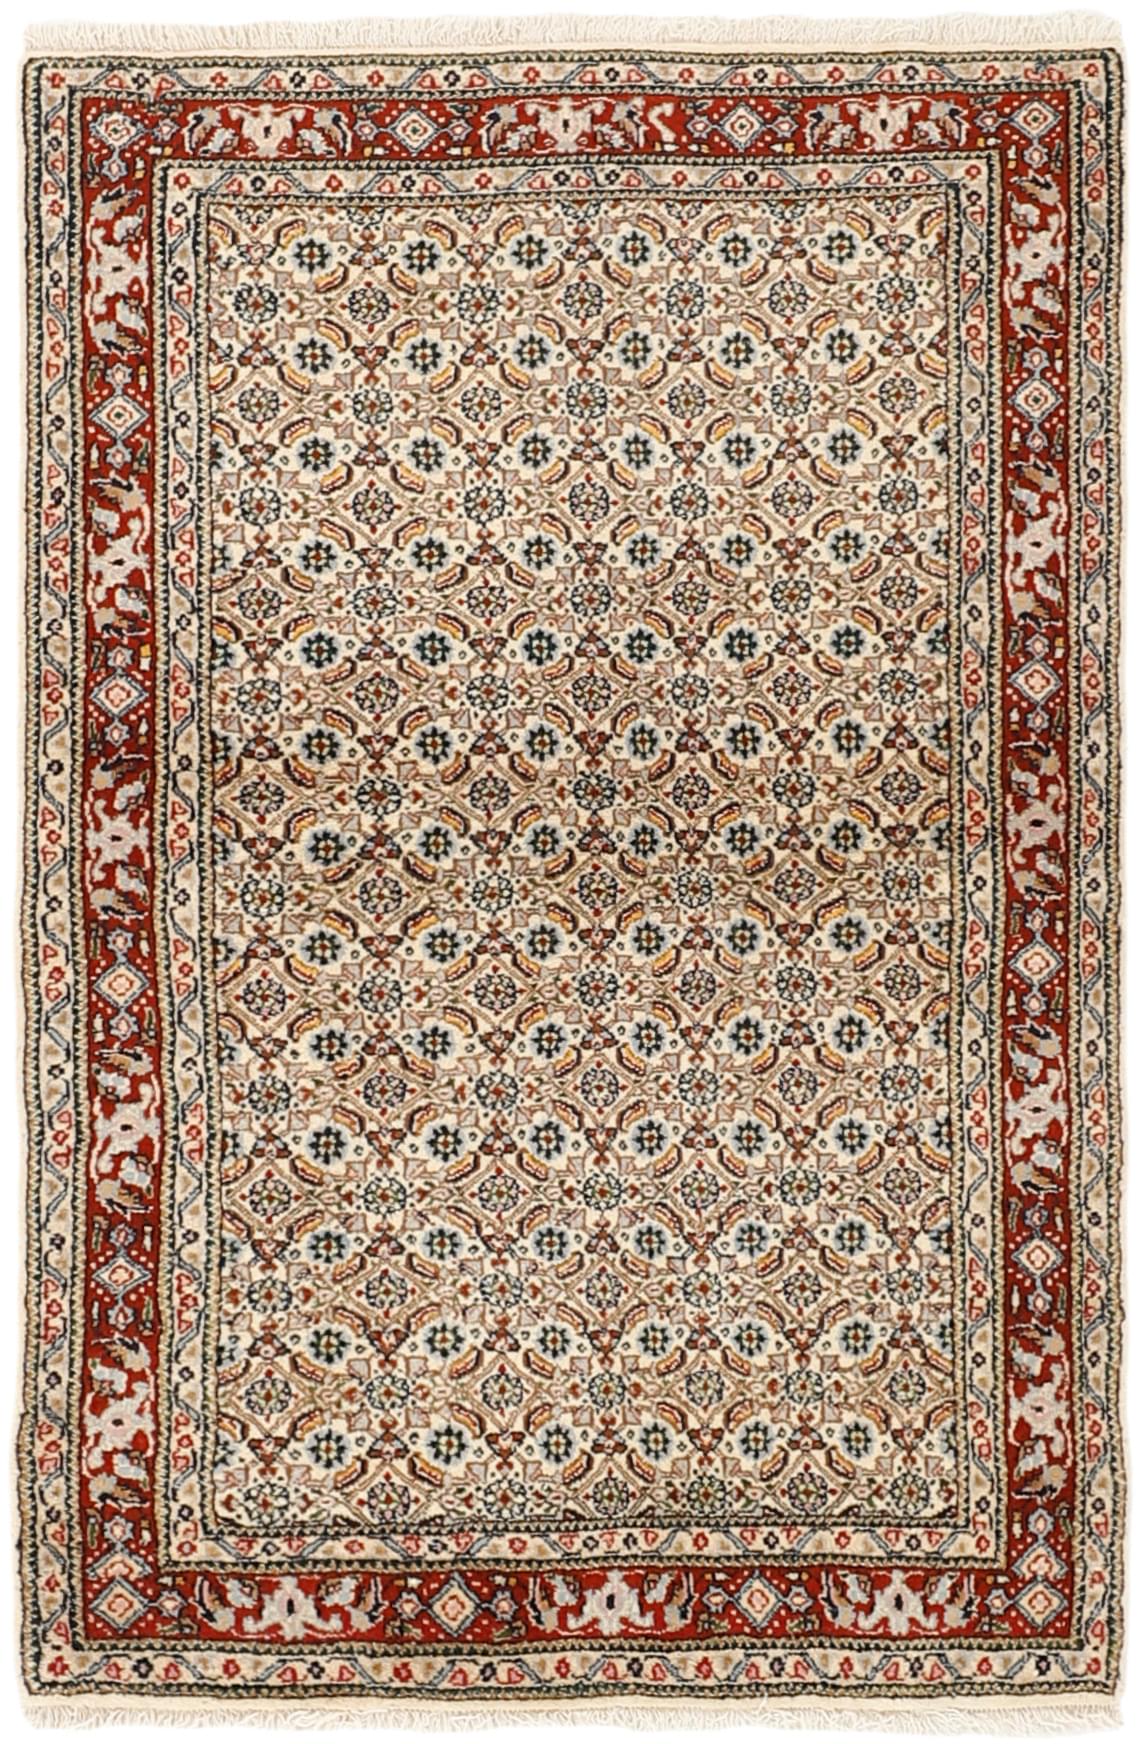 authentic persian rug with traditional floral pattern in red